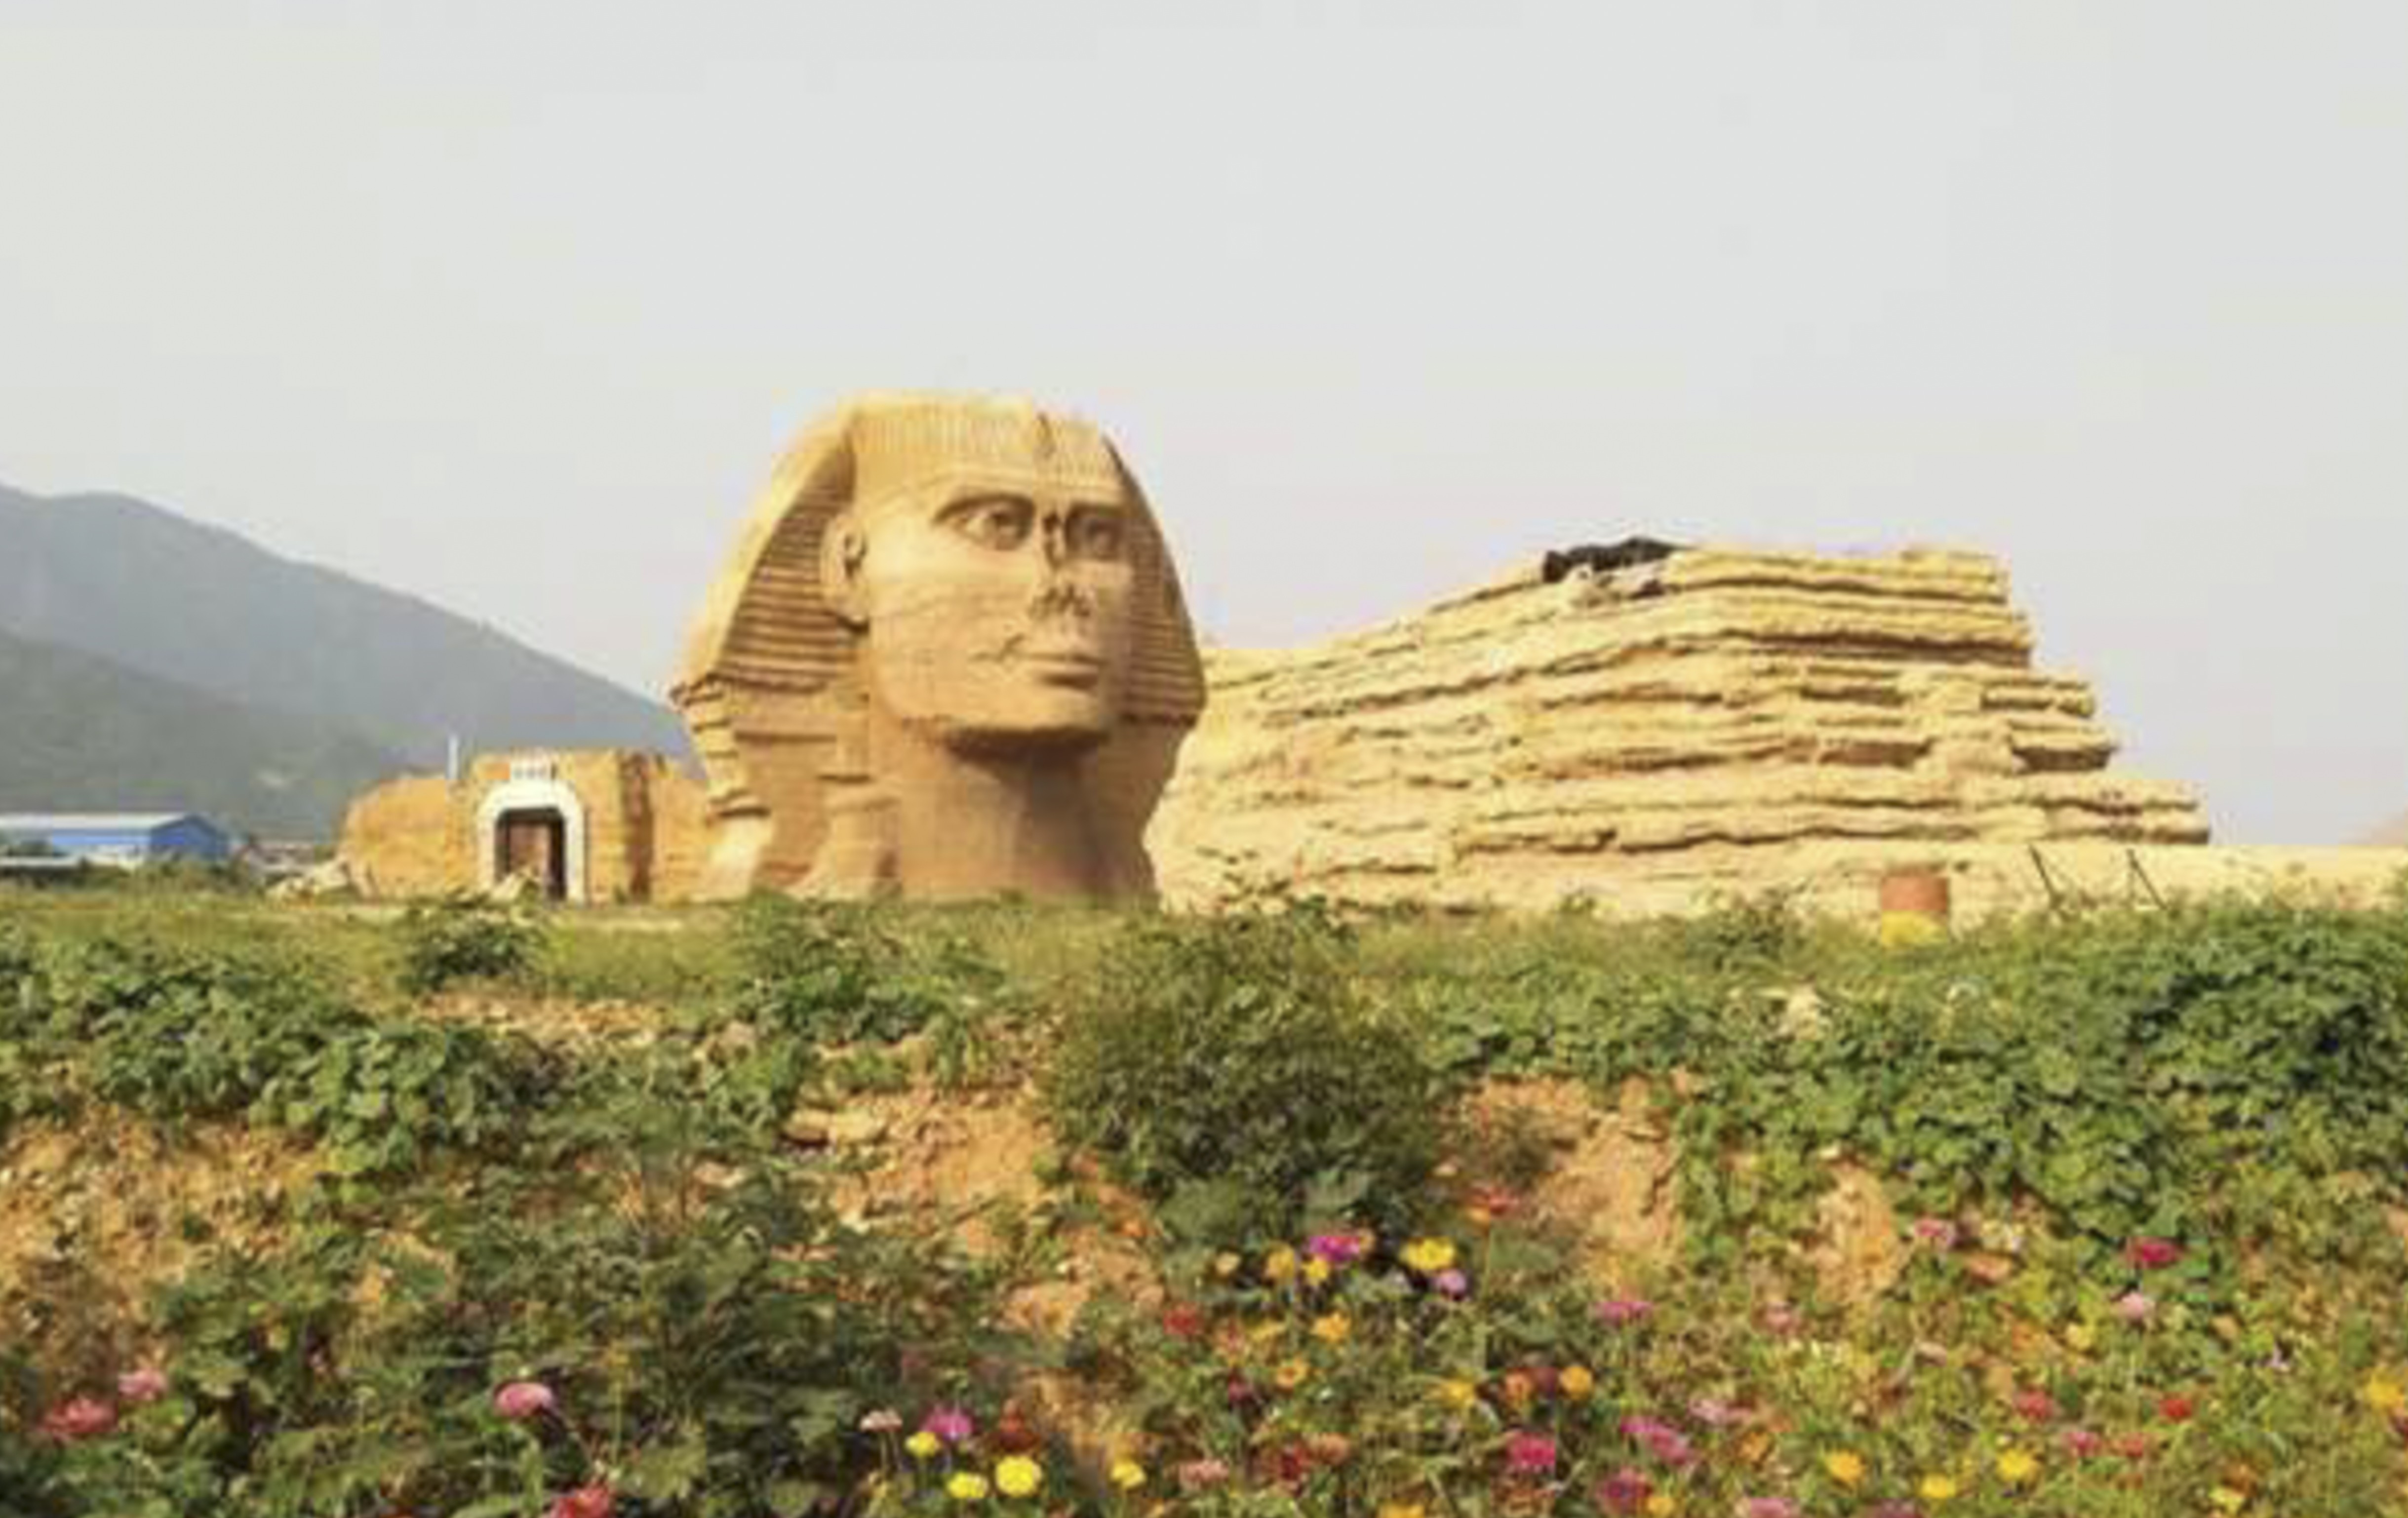 Authorities in Egypt are angry about the reappearance of a giant replica of the Great Sphinx of Giza at a culture park in northern China. Photo: News.163.com